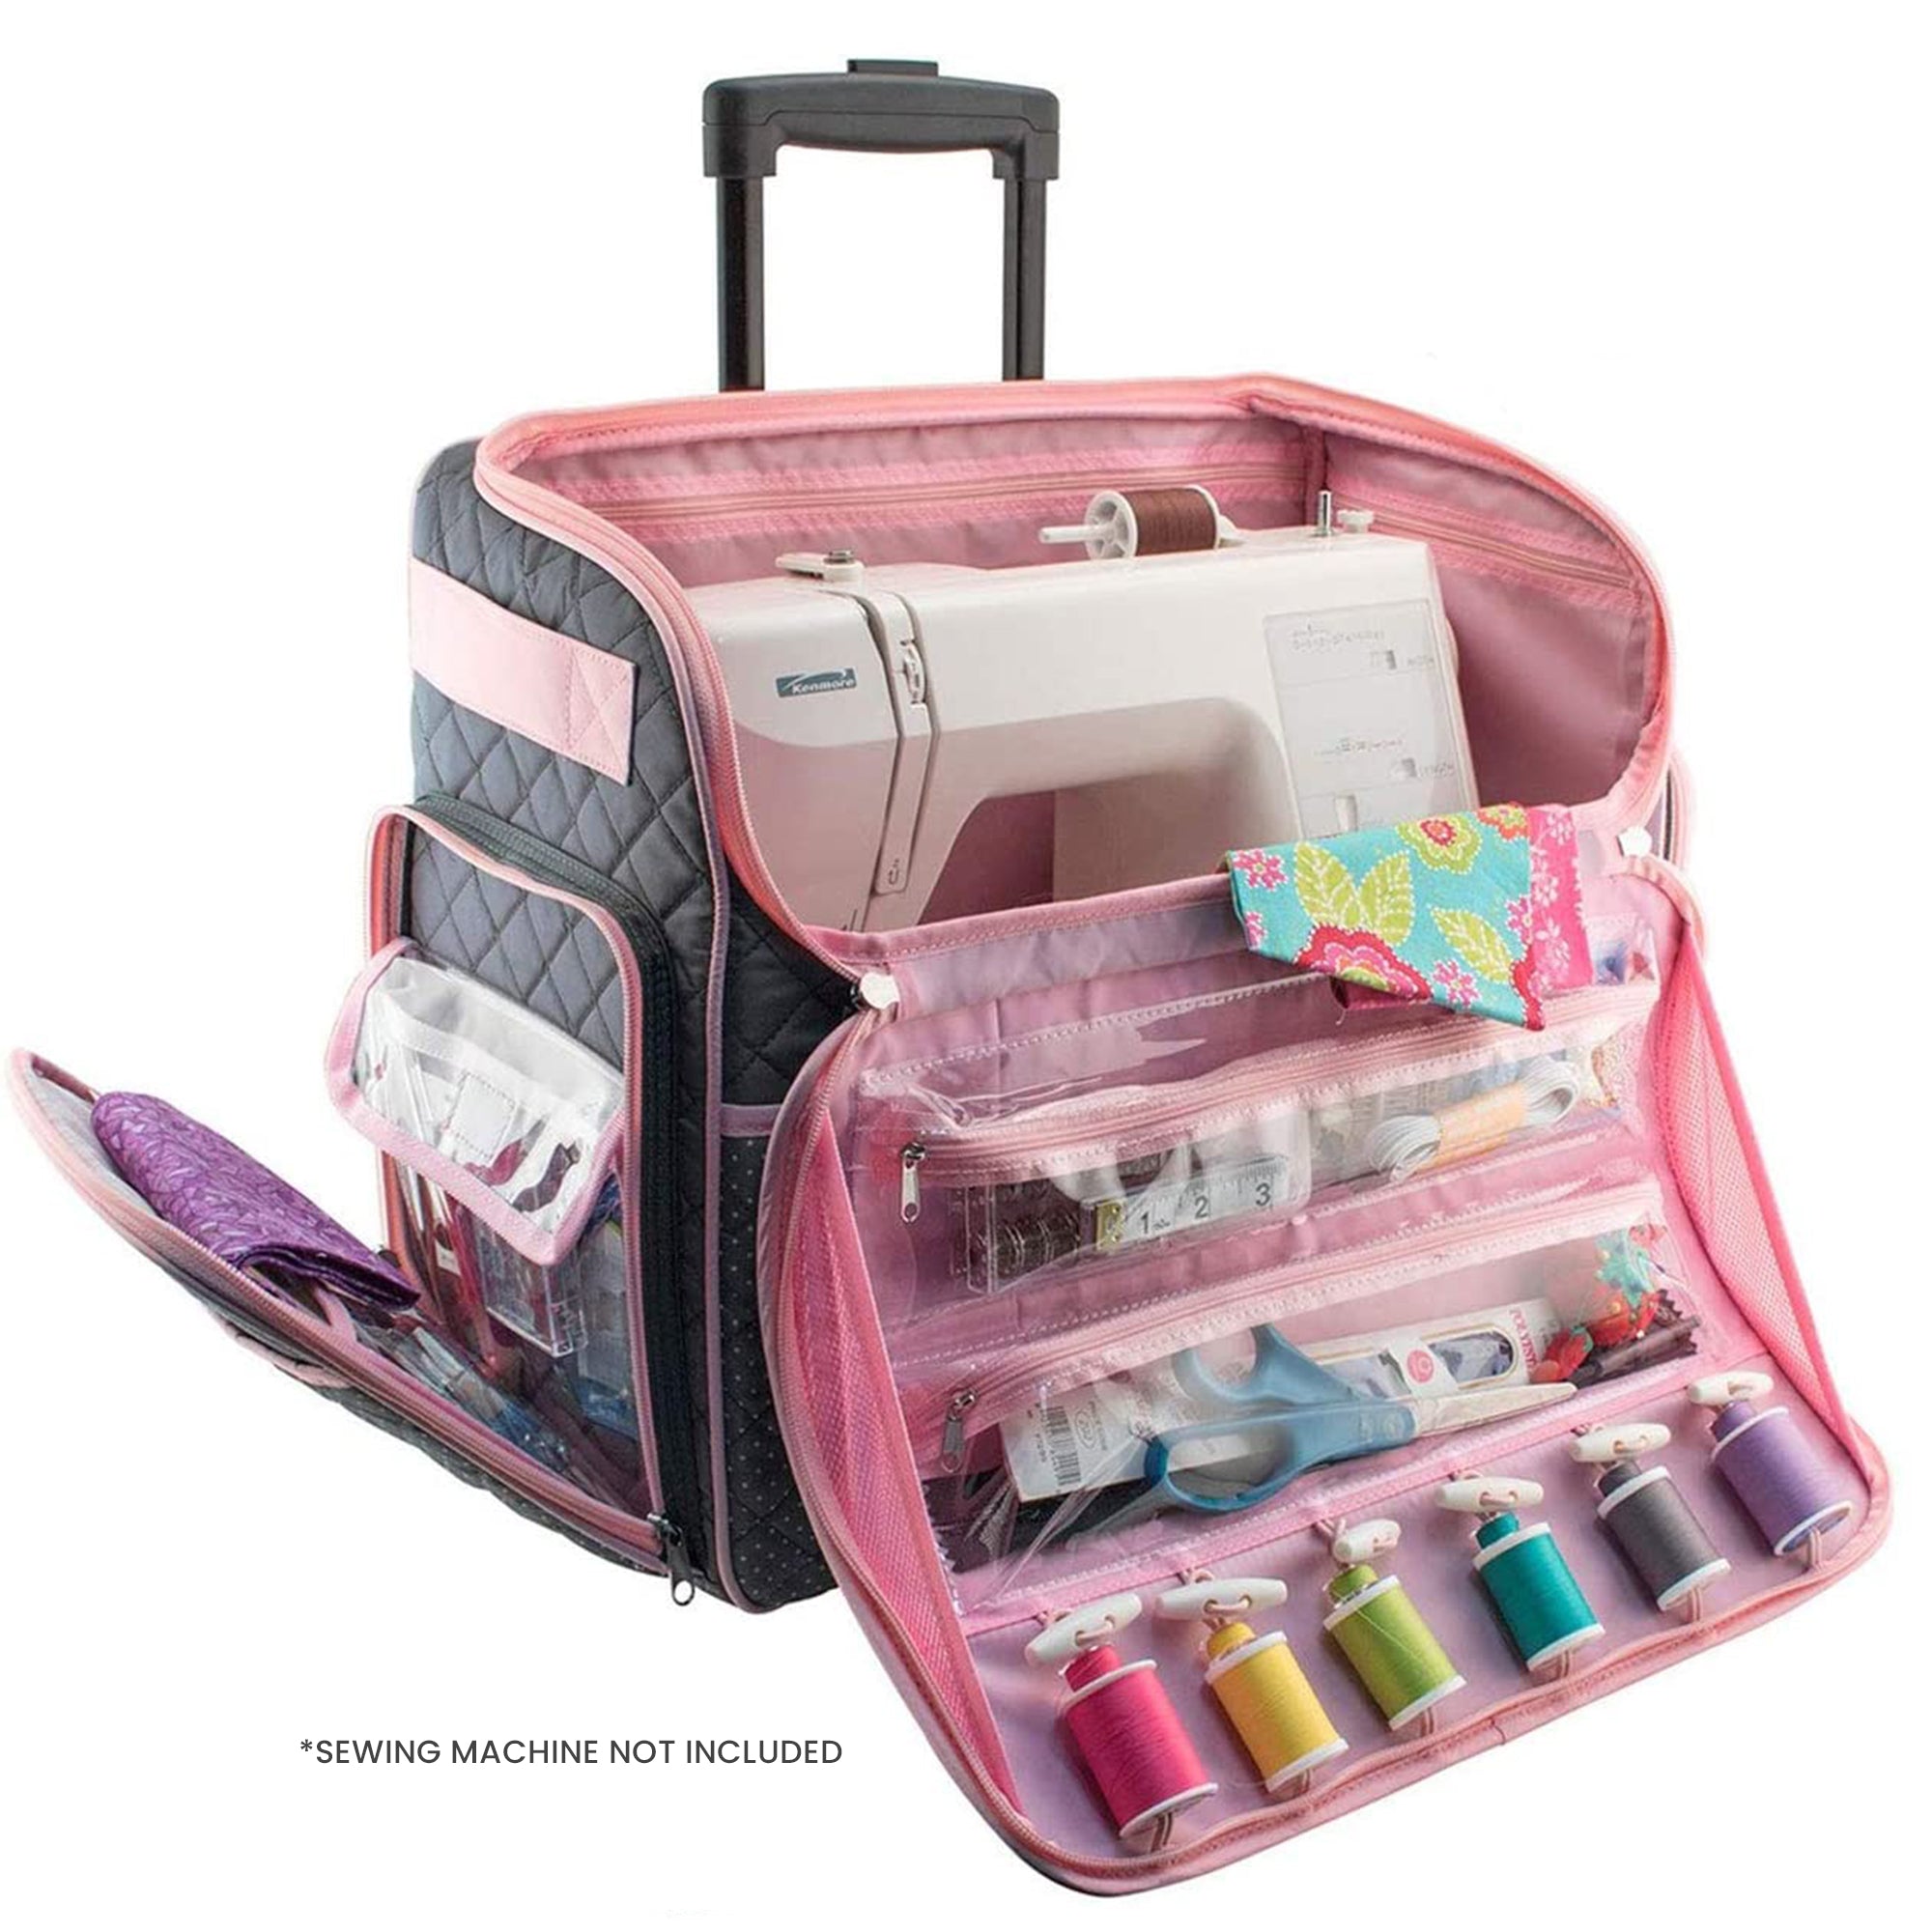 Sewing Machine Cases: Bags, Rolling Totes, & Travel Trolleys